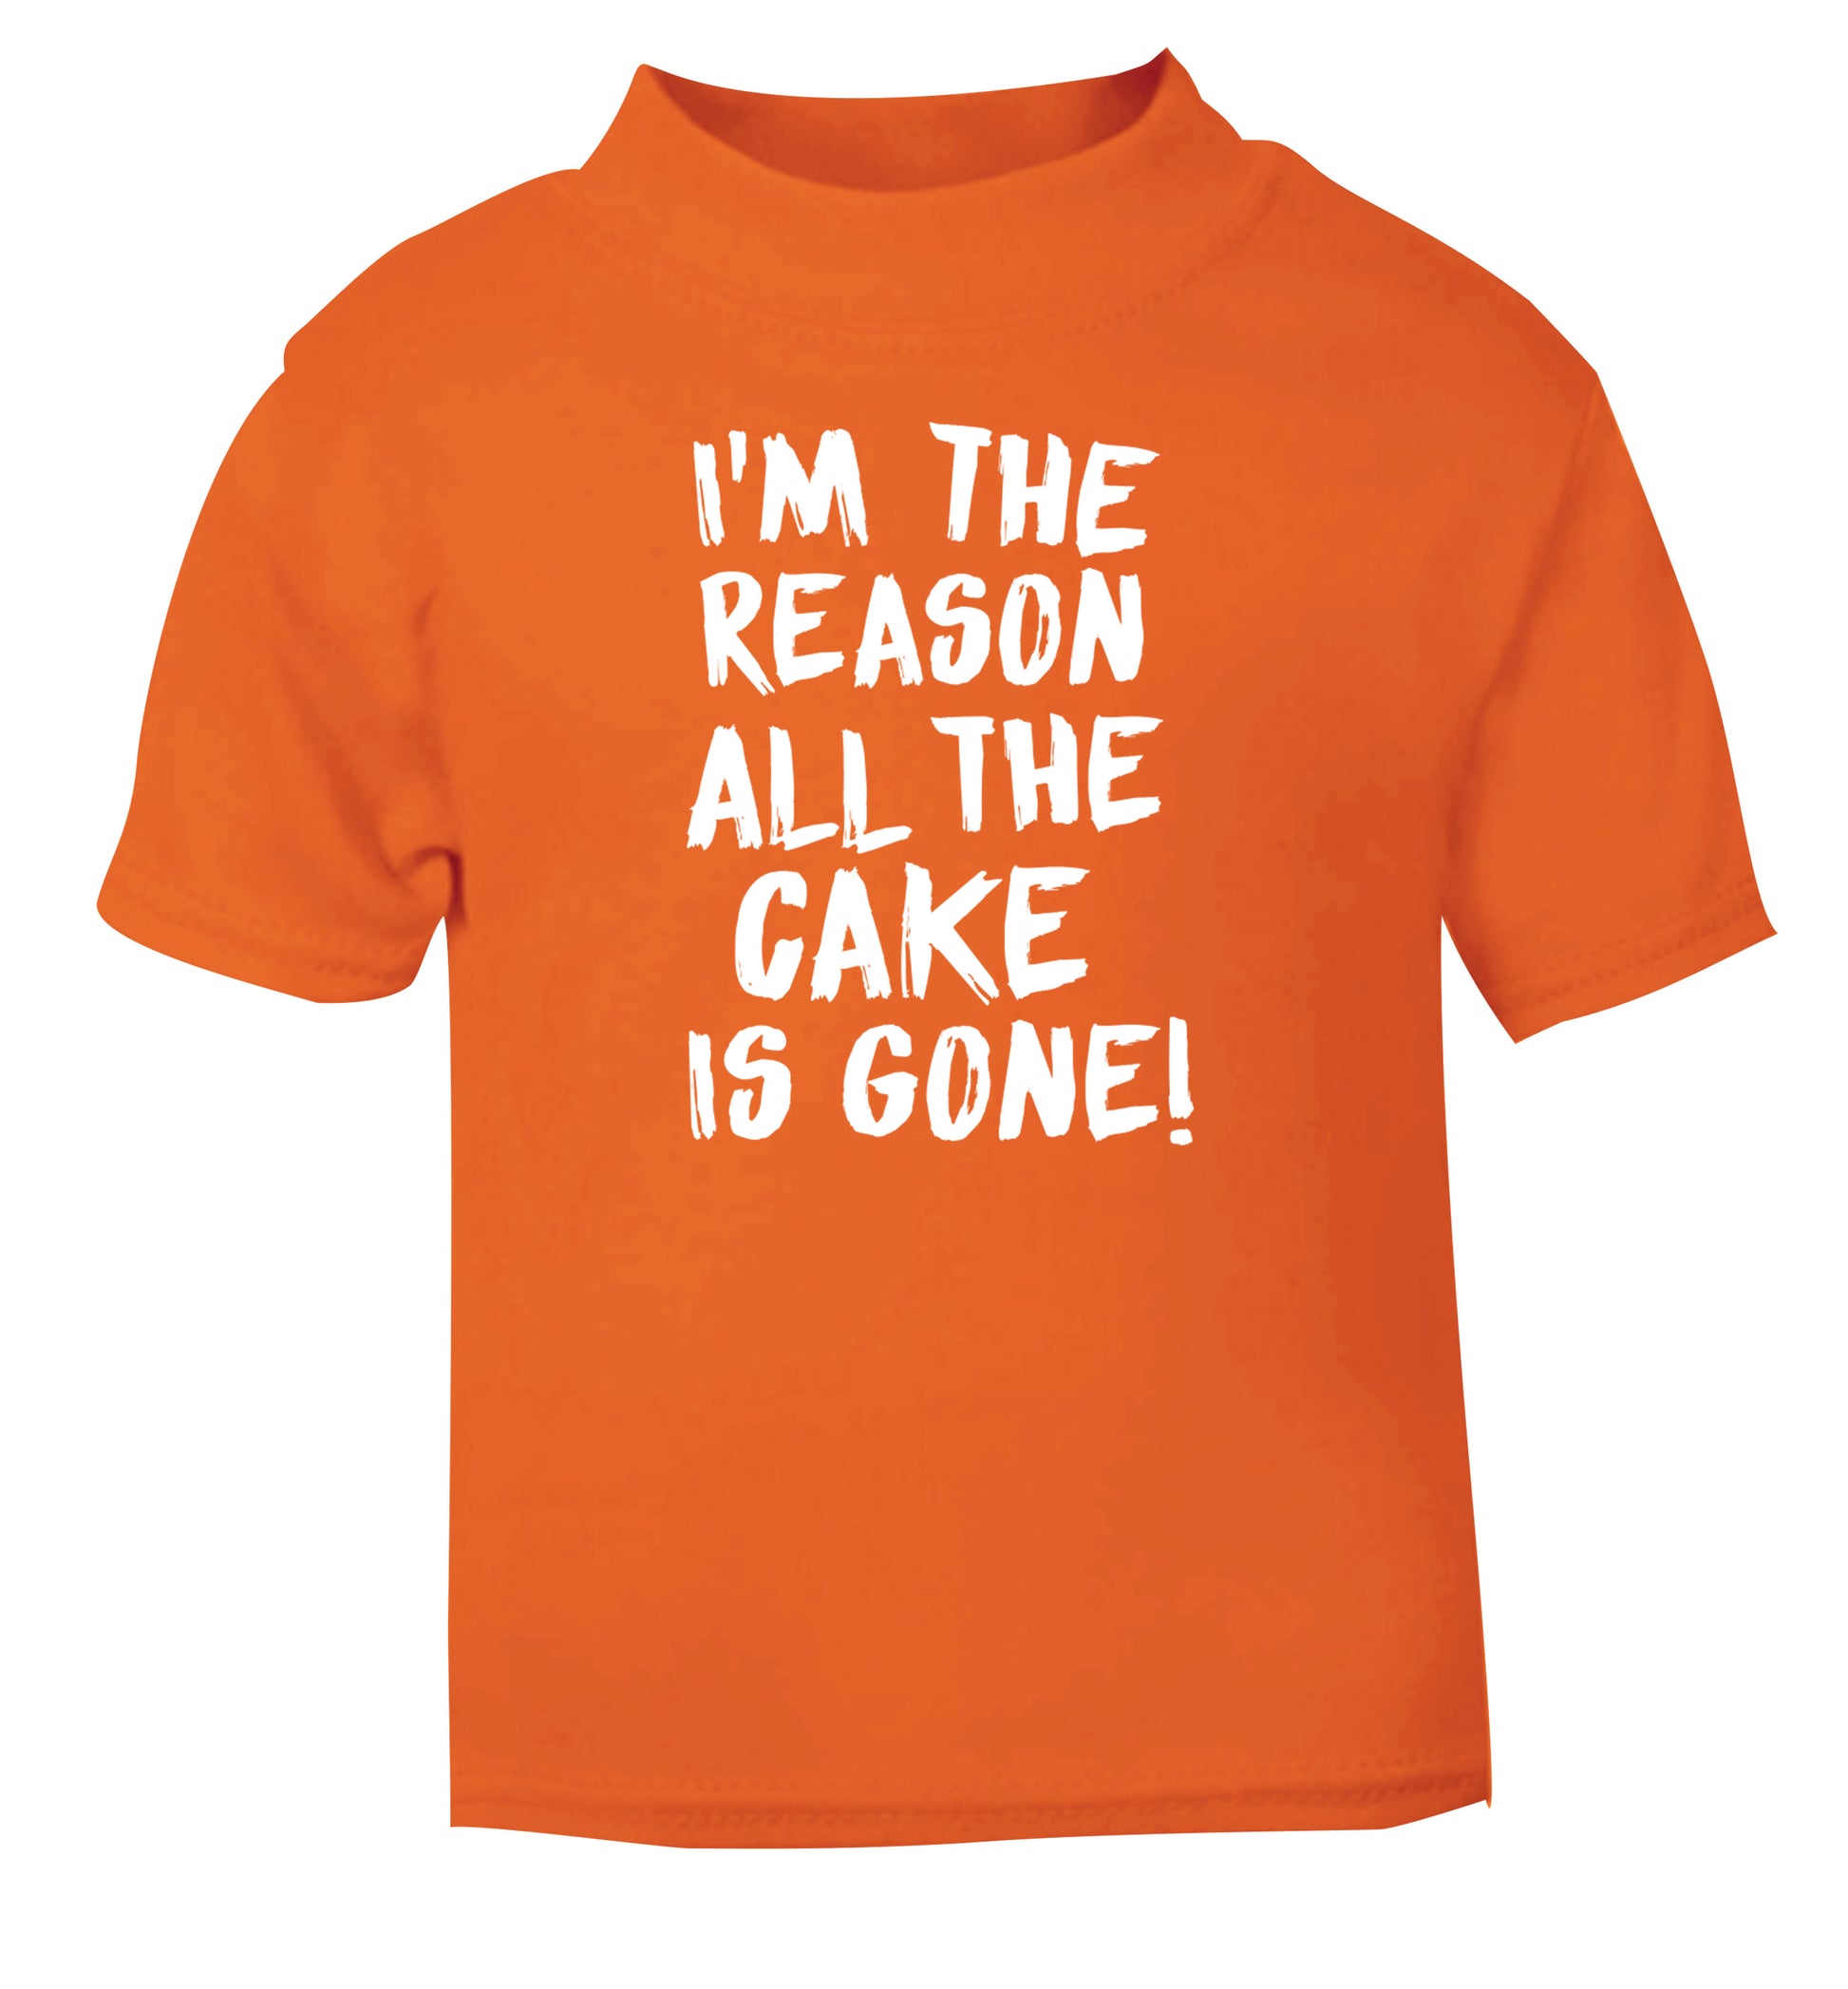 I'm the reason all the cake is gone orange Baby Toddler Tshirt 2 Years